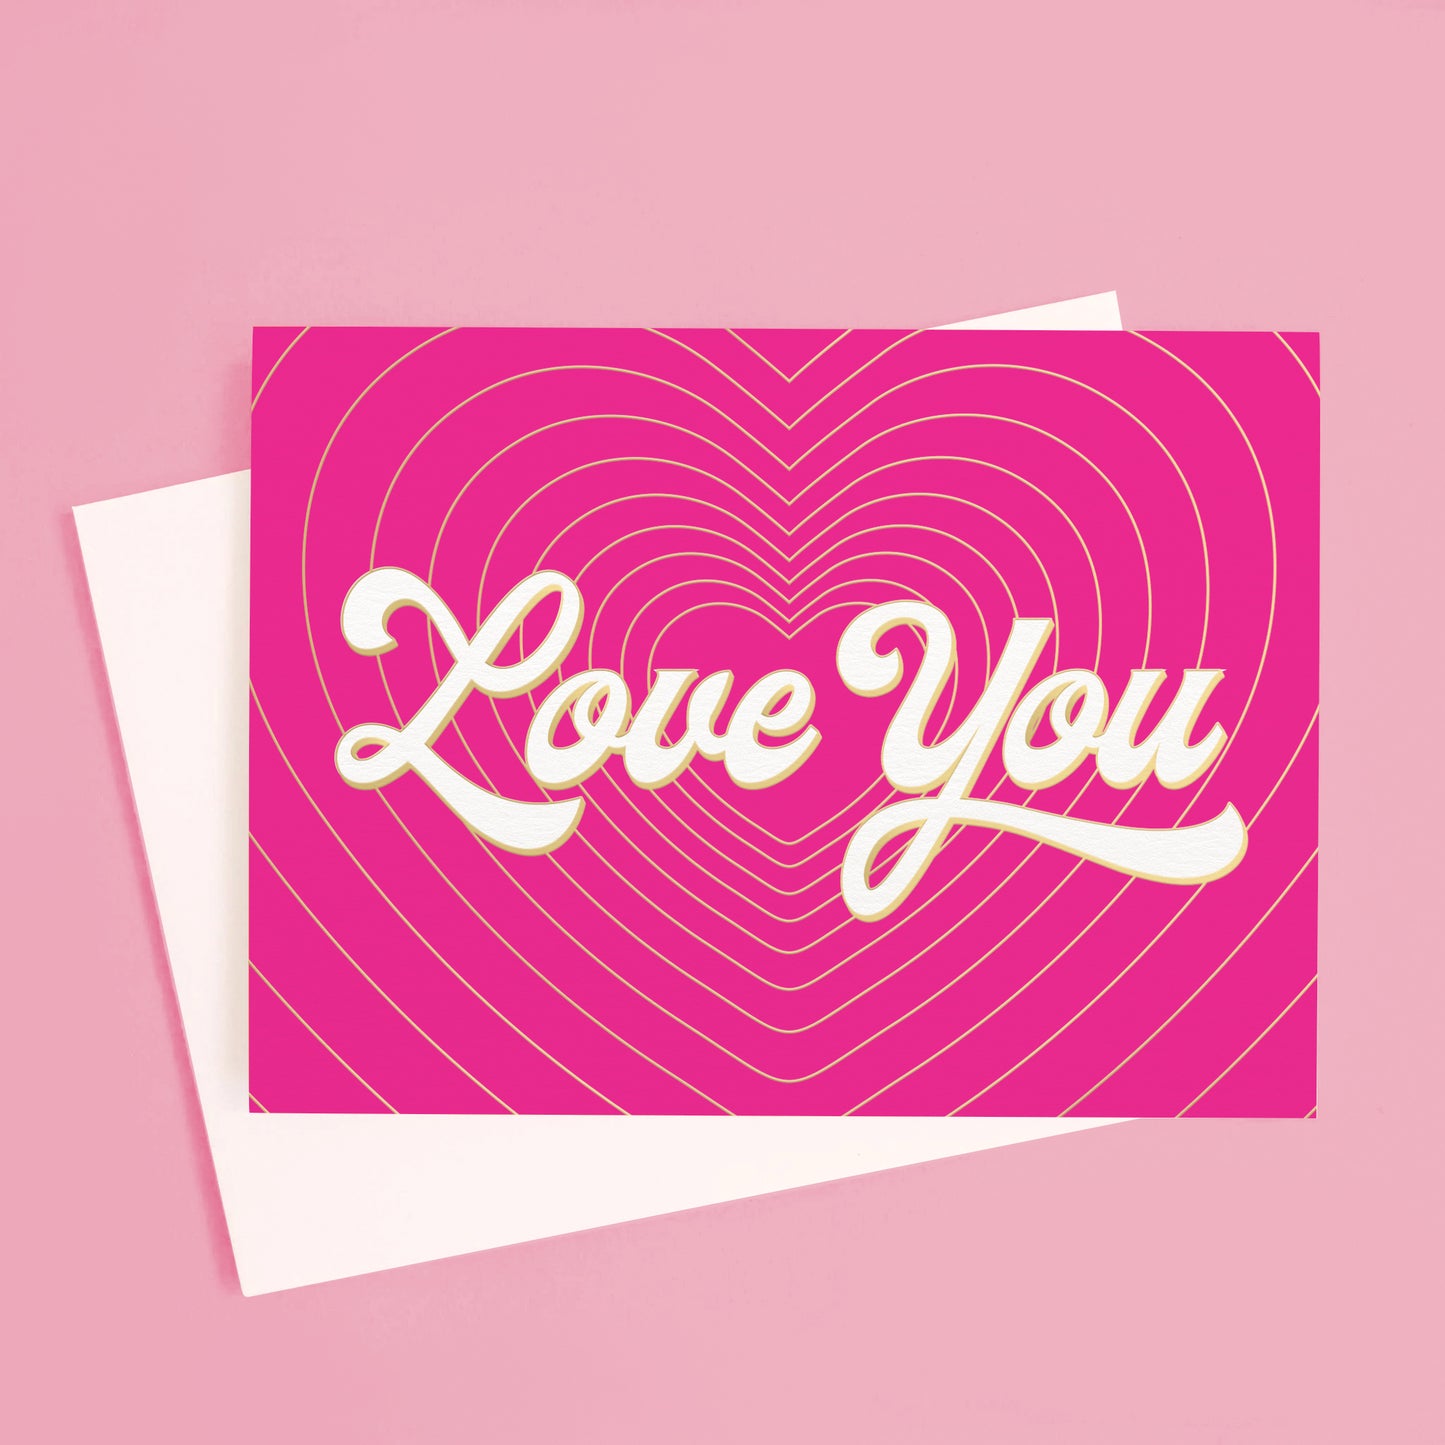 On a pink background is a hot pink card with gold heart shaped lines with ivory text in the center that reads, "Love You".